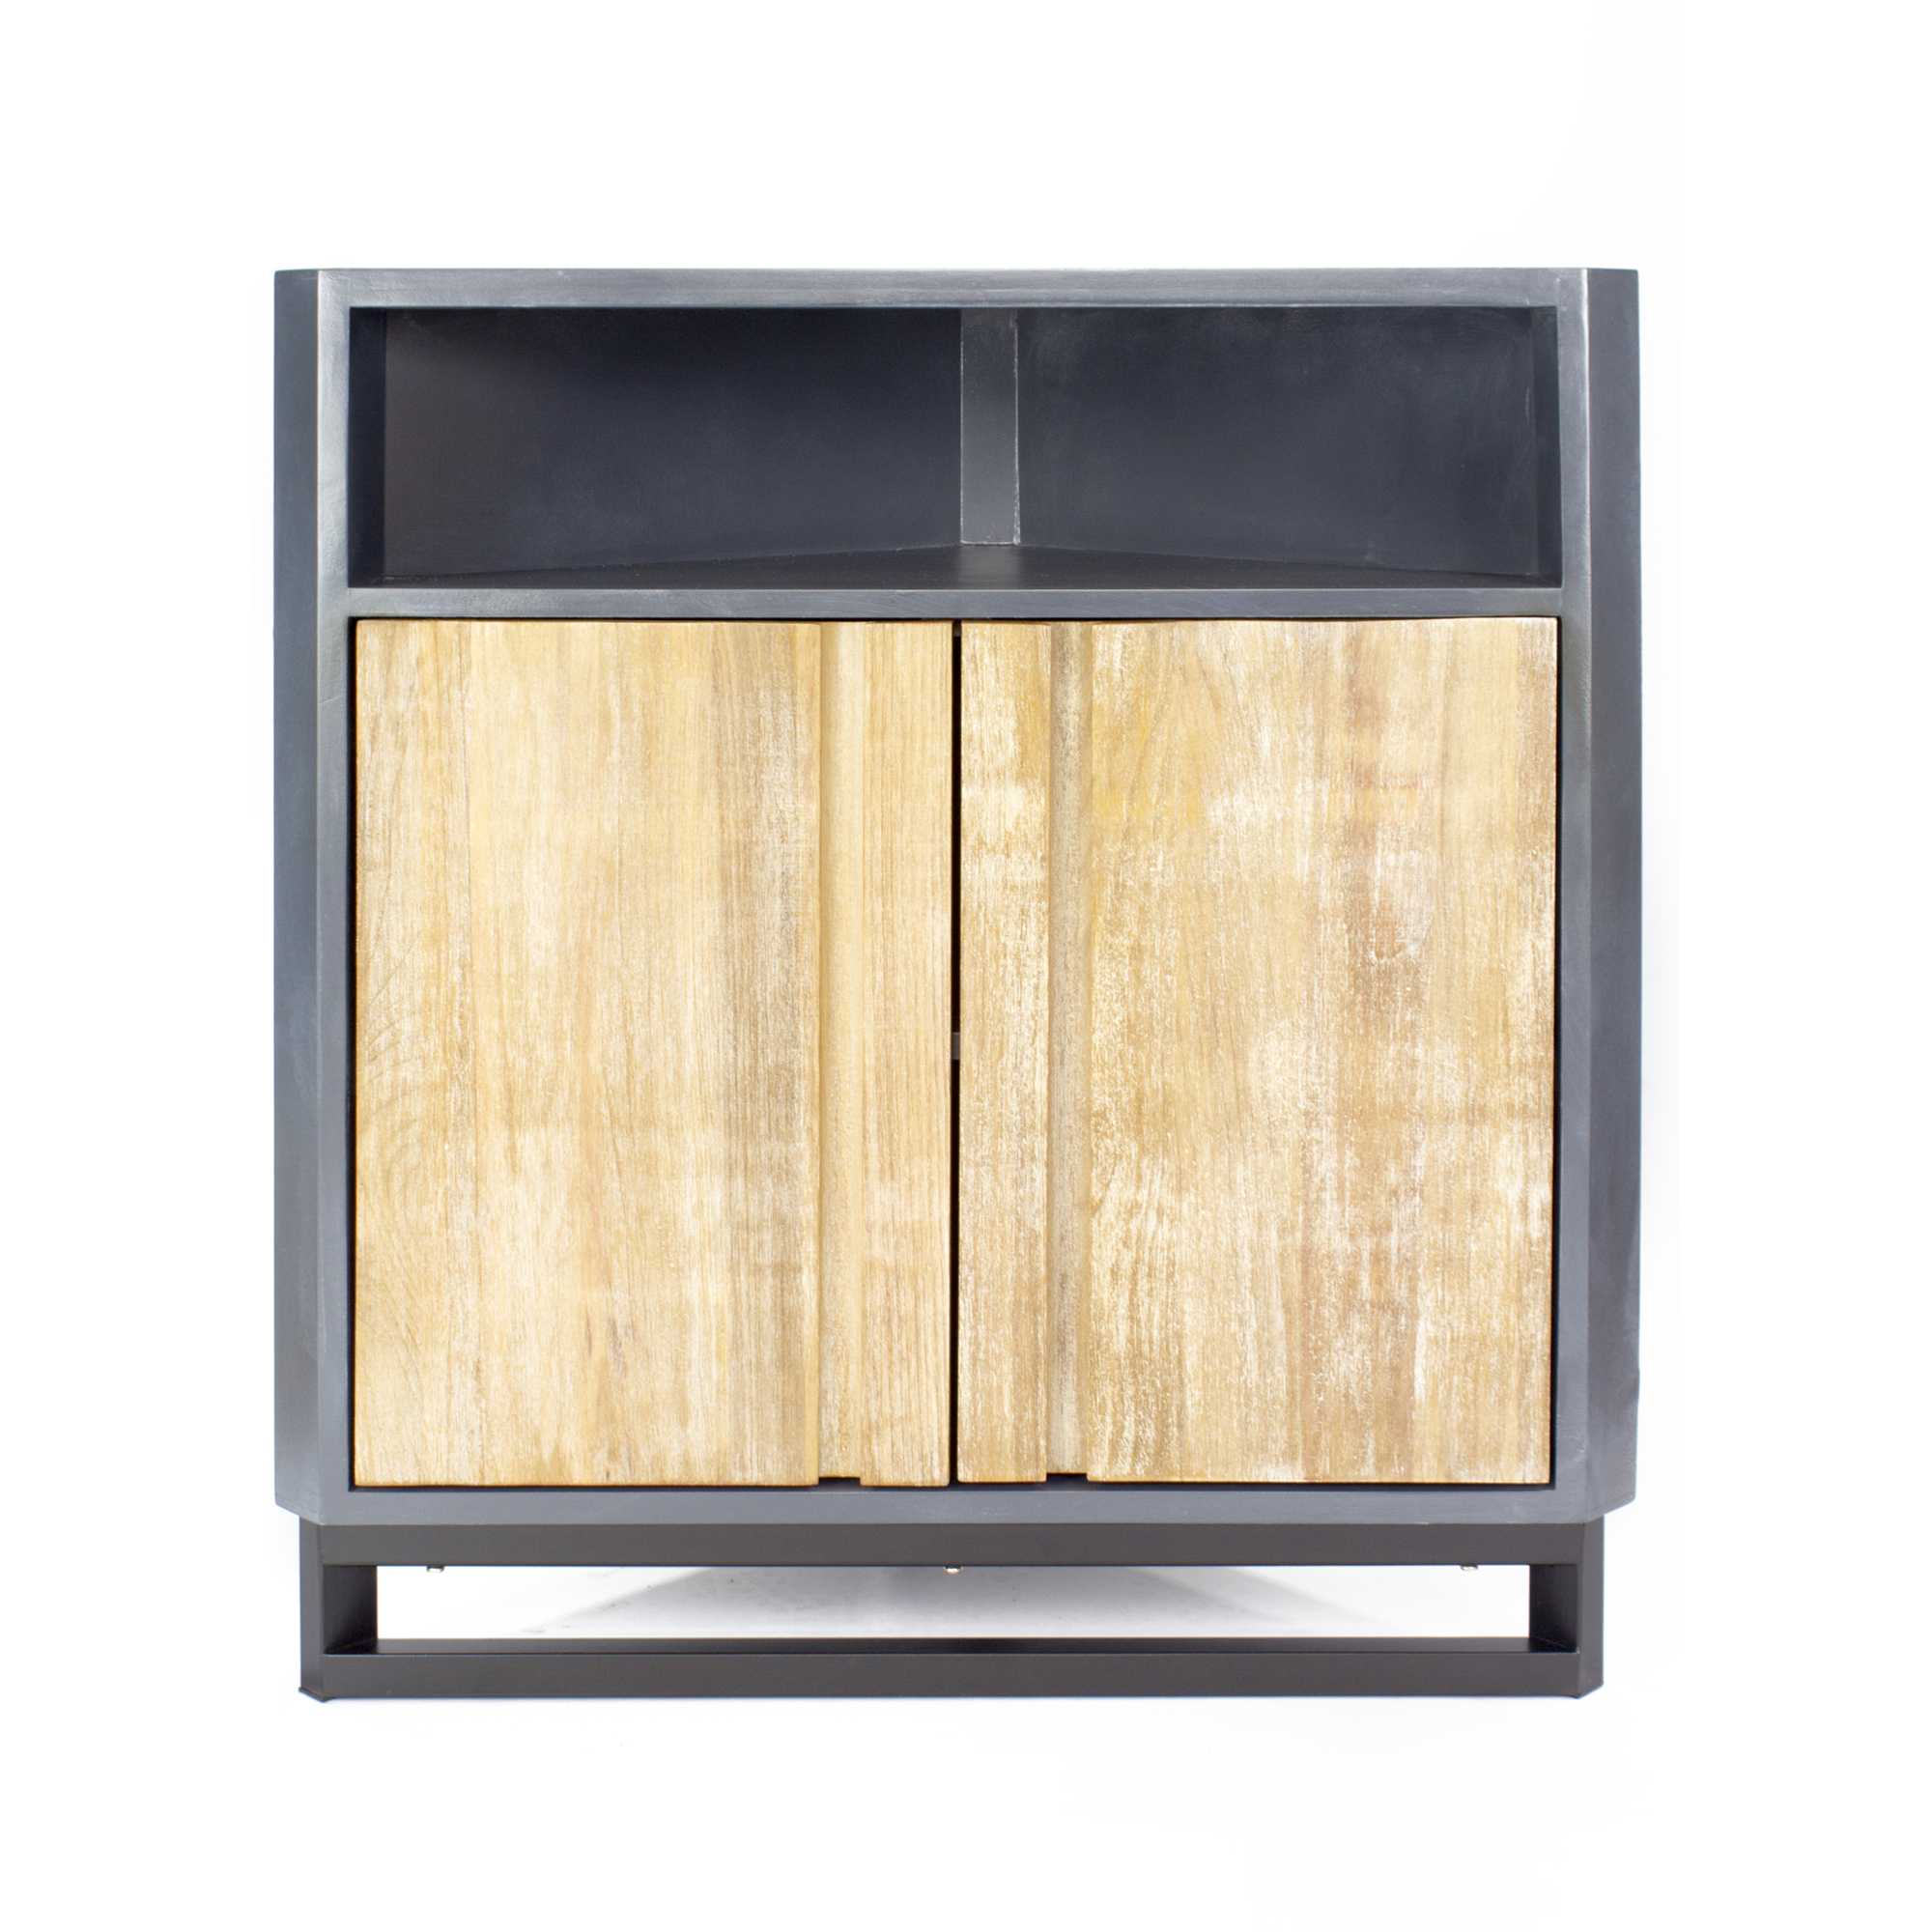 Gray MDF Wood Metal Corner Cabinet with Doors and a Shelf